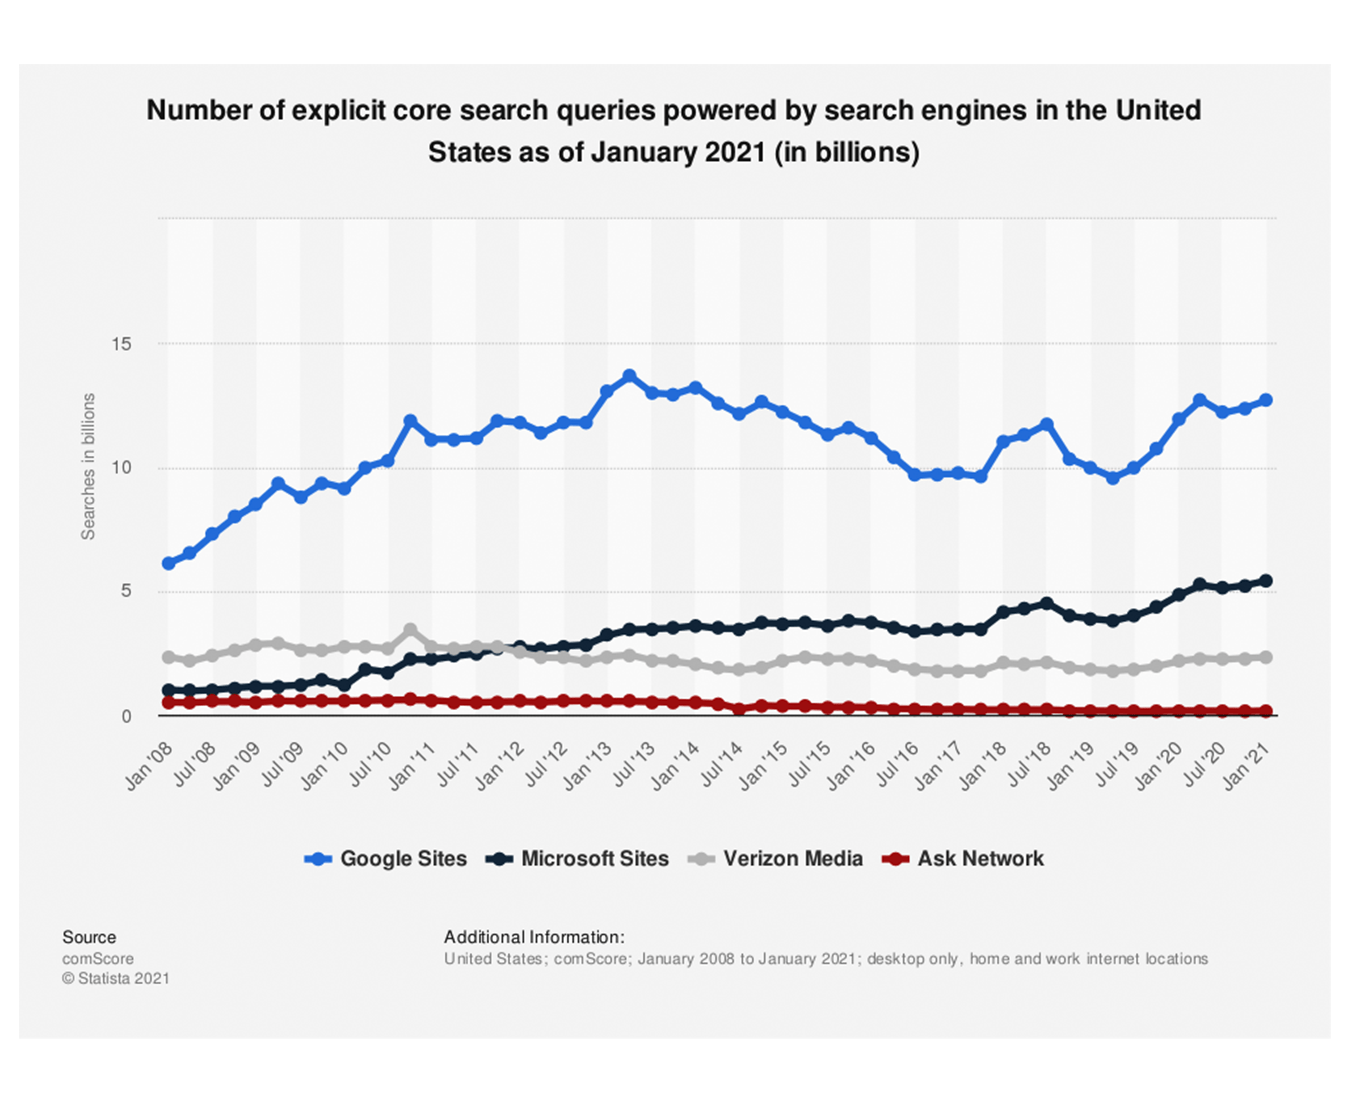 Number of explicit core search queries powered by search engines in the United States as of January 2021